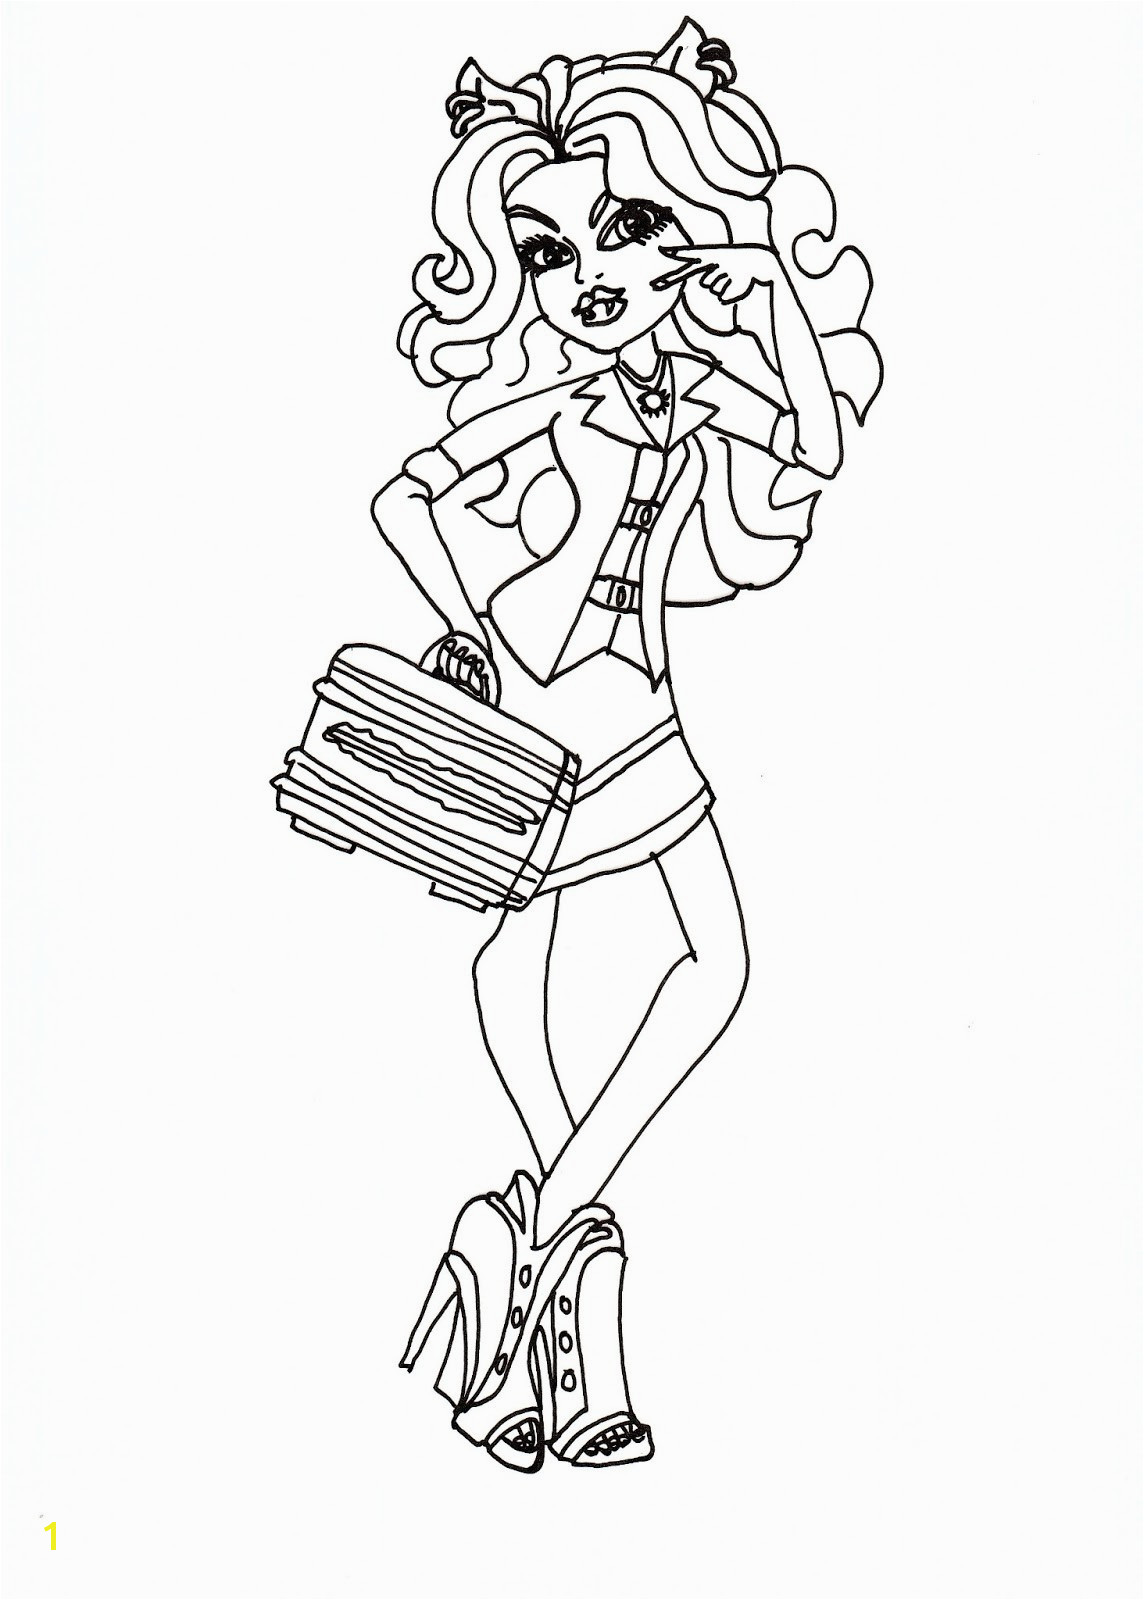 Coloring Pages Monster High Characters Awesome Elegant Monster High Coloring Book Coloring Pages Coloring